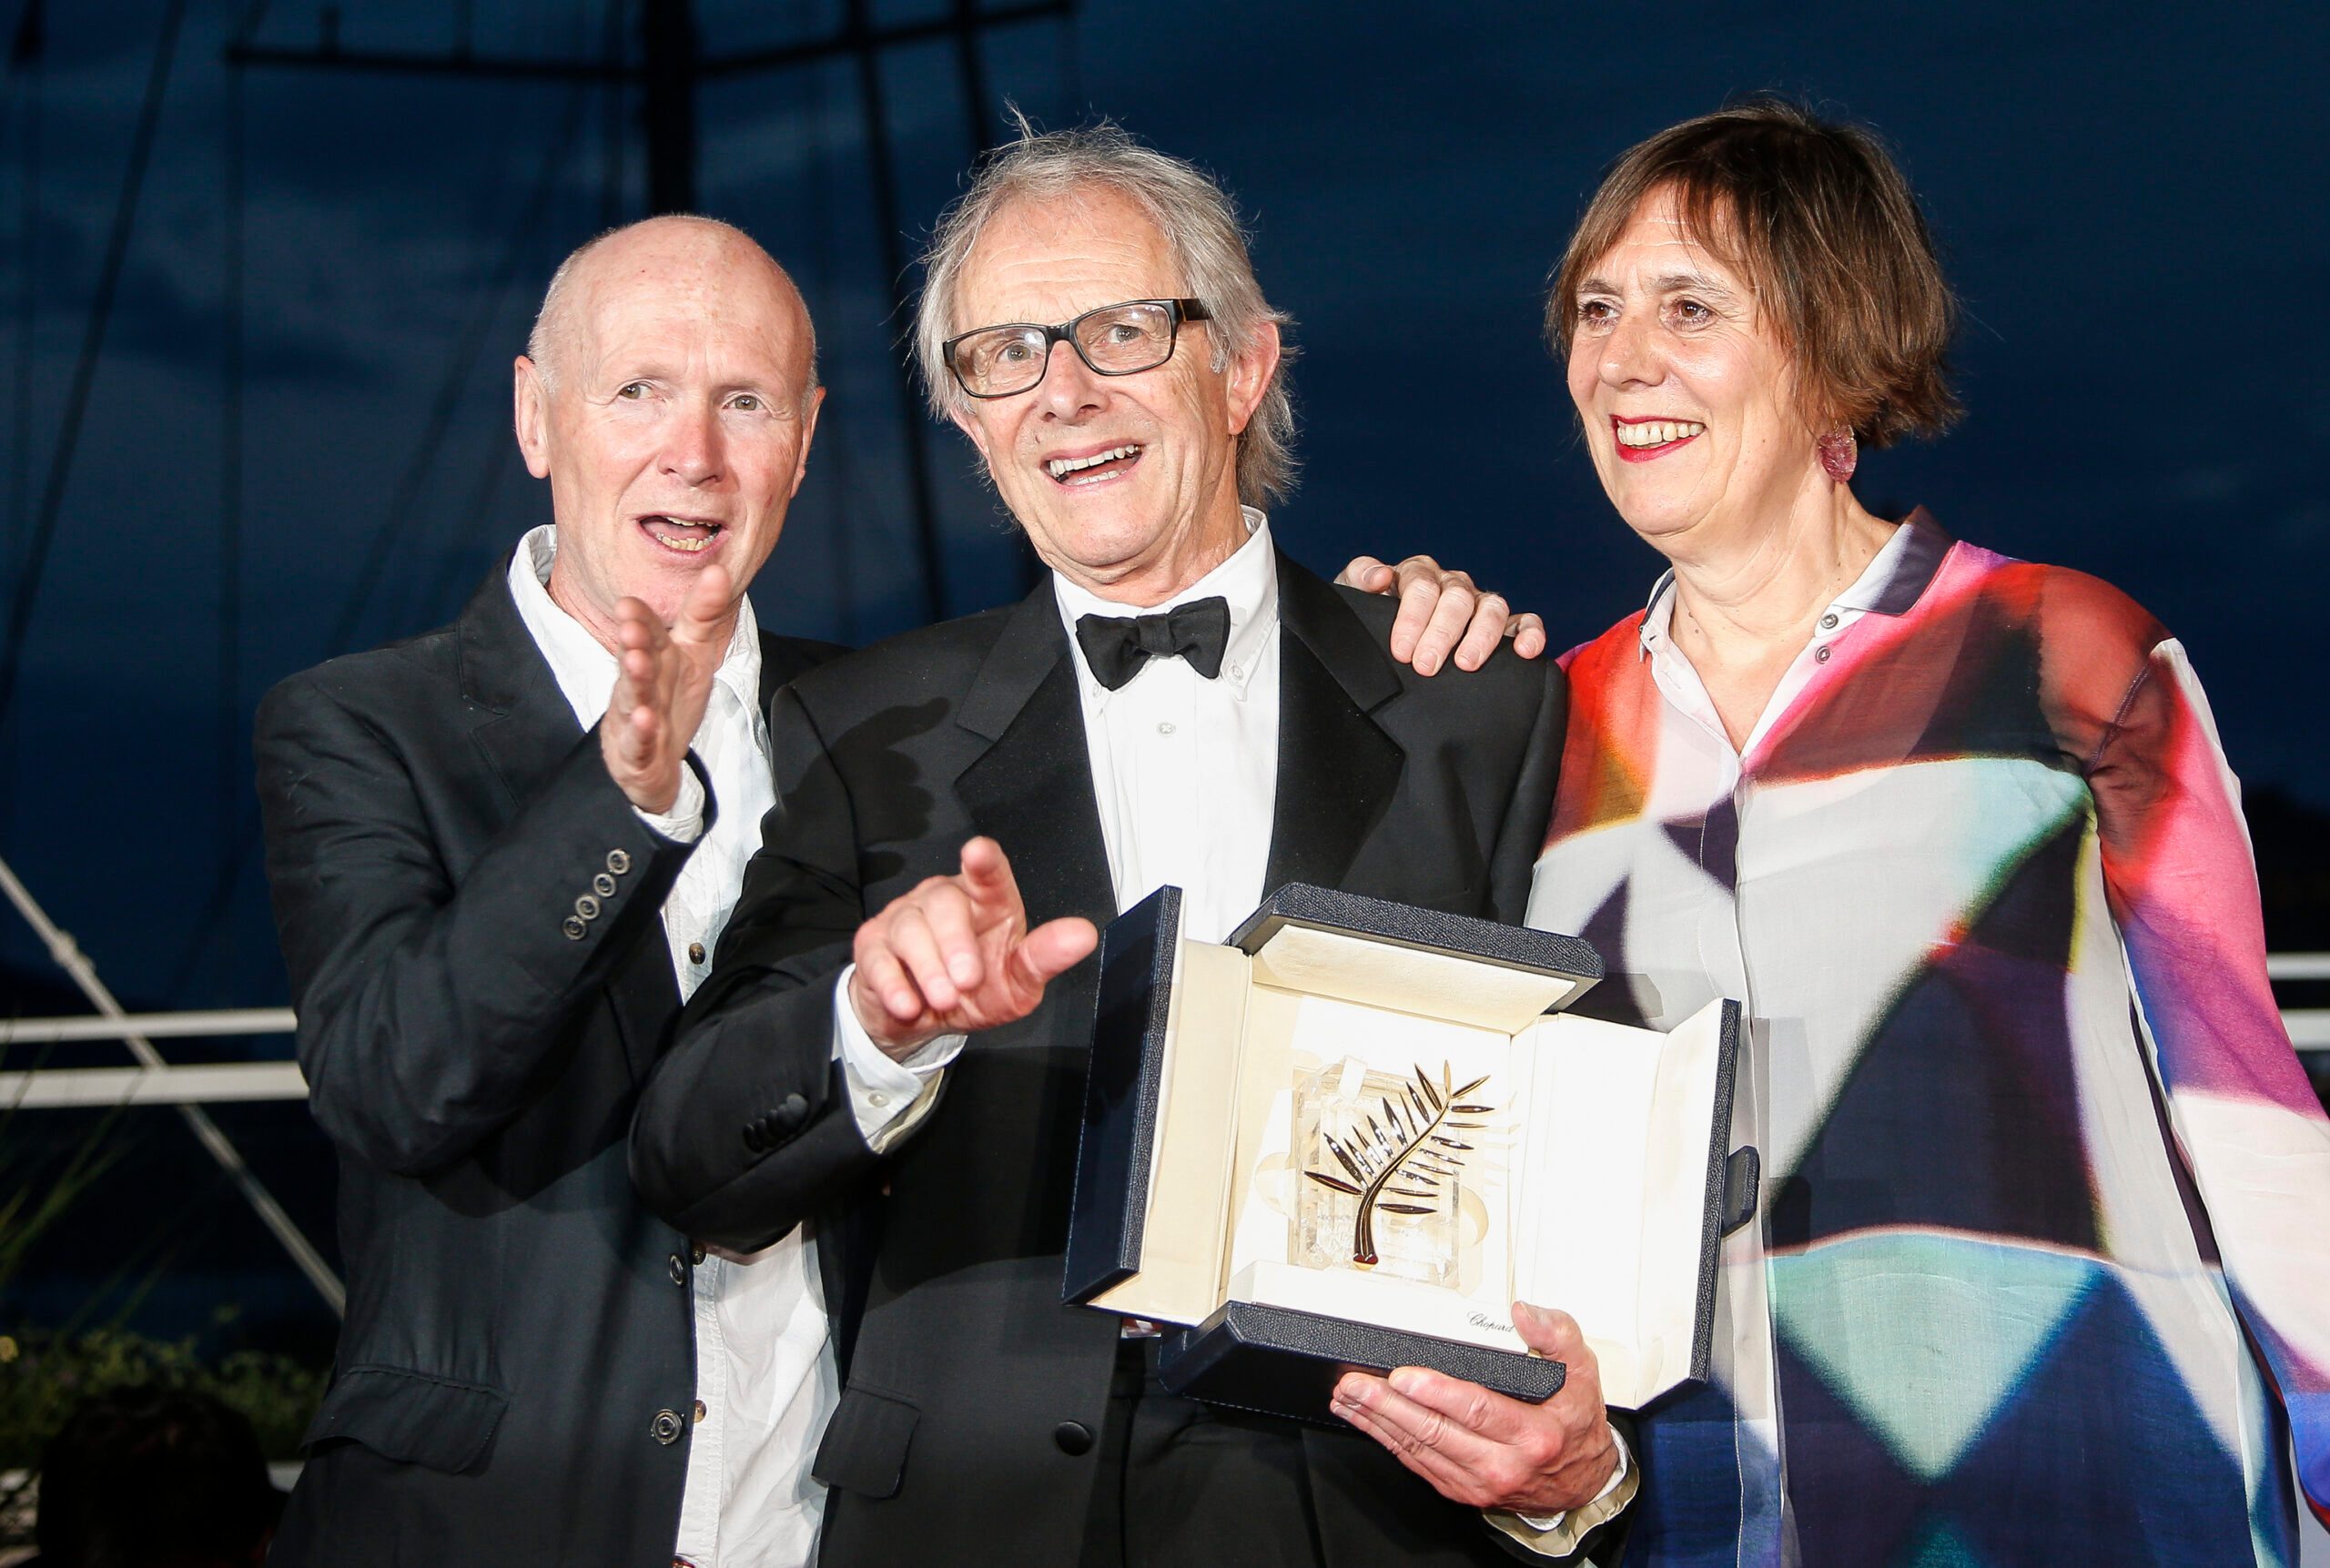 Britain’s Ken Loach wins Cannes gold with moving austerity tale